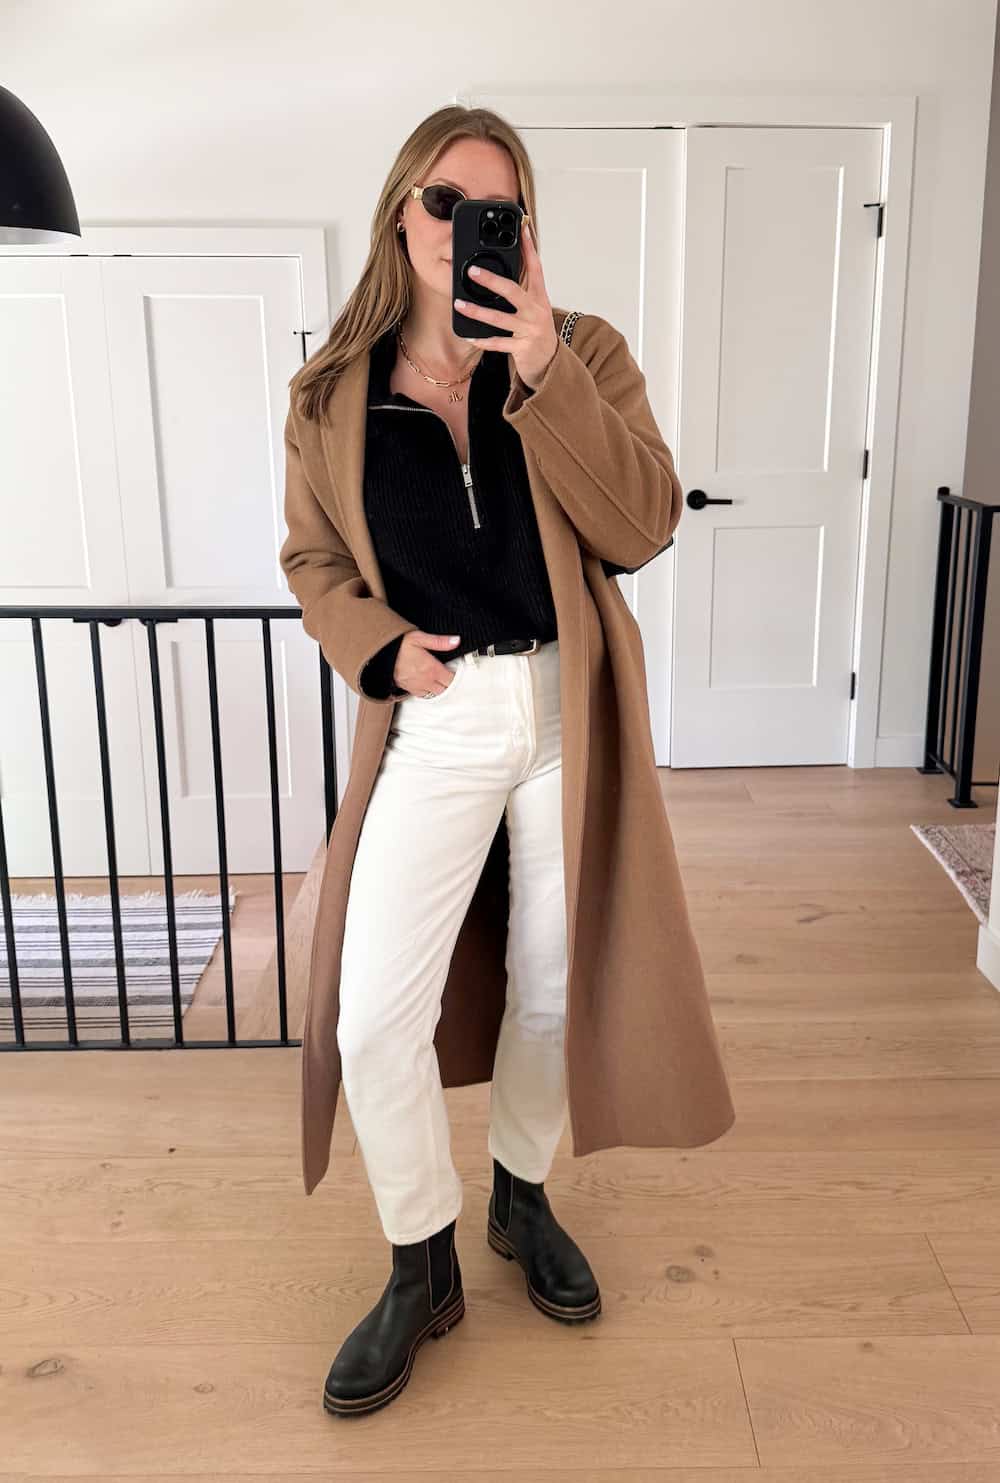 Christal wearing white jeans, a black quarter zip sweater, black boots and a long camel colored coat.